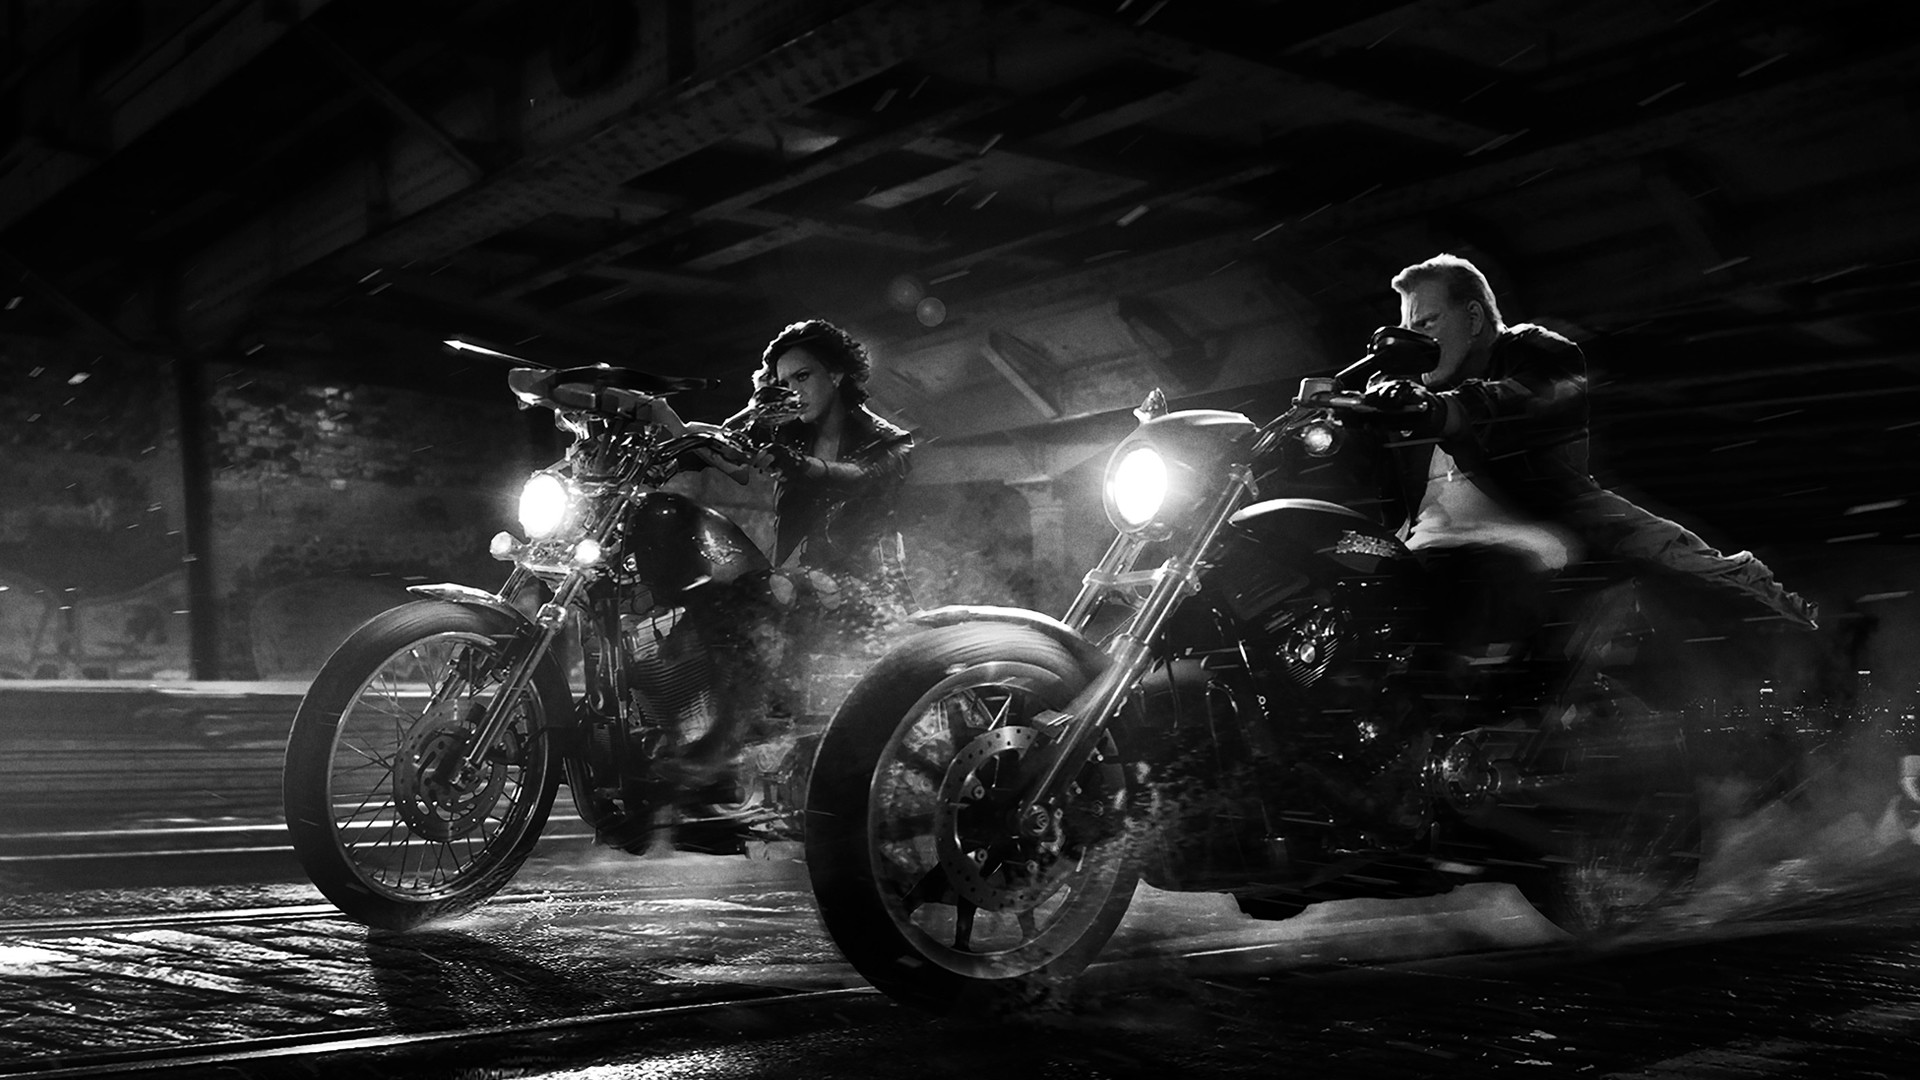 1920x1080 Sin City: A Dame to Kill For - DC FilmdomDC Filmdom | Entertainment reviews  by Michael Parsons and Eddie Pasa